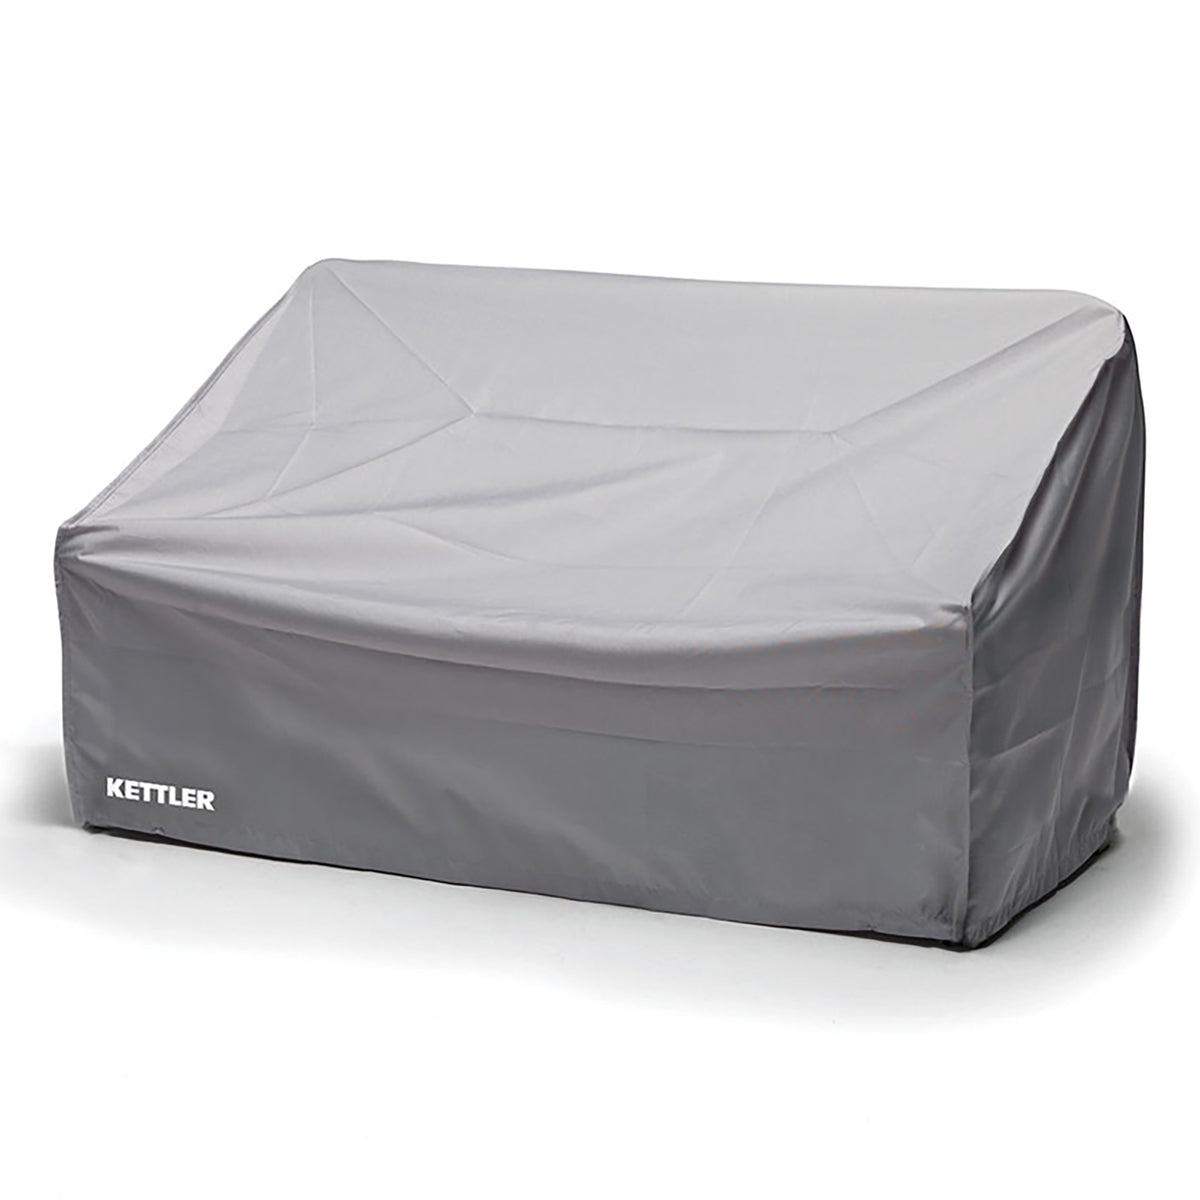 Kettler Protective Garden Furniture Cover for Palma Low Lounge Companion Set